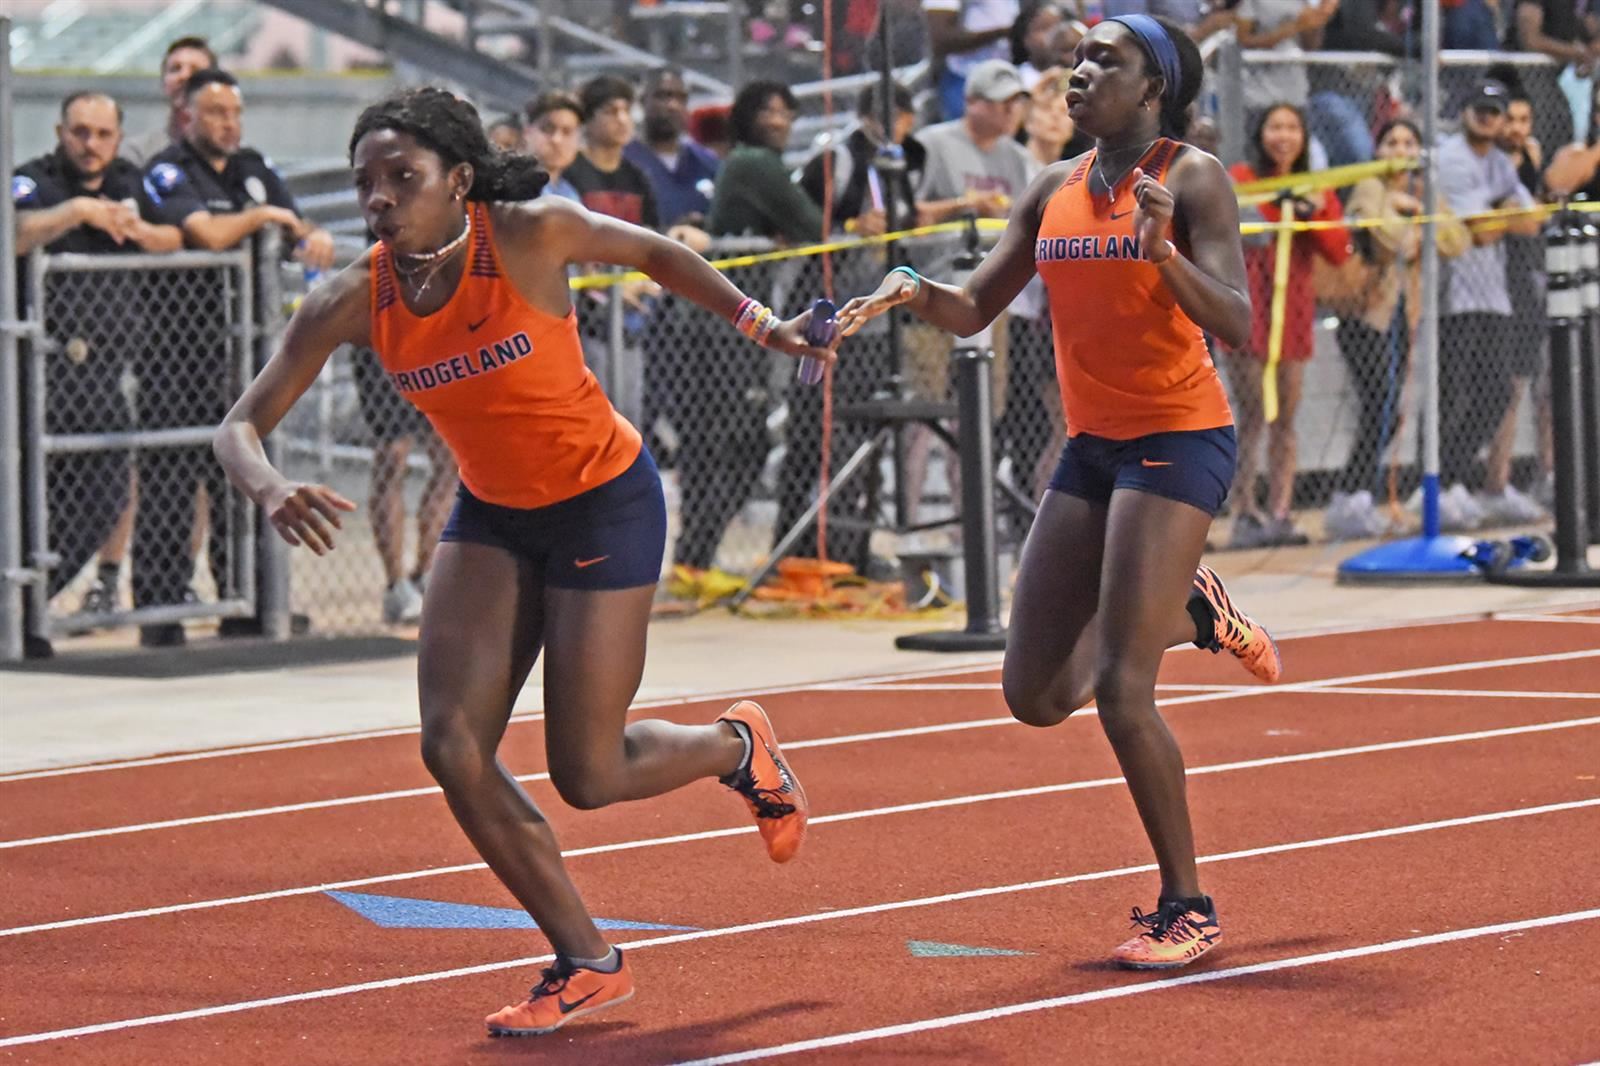 Bridgeland High School senior Cameilla Huggins, right, and Rosa Huggins helped the 4x400-meter relay team qualify for state.